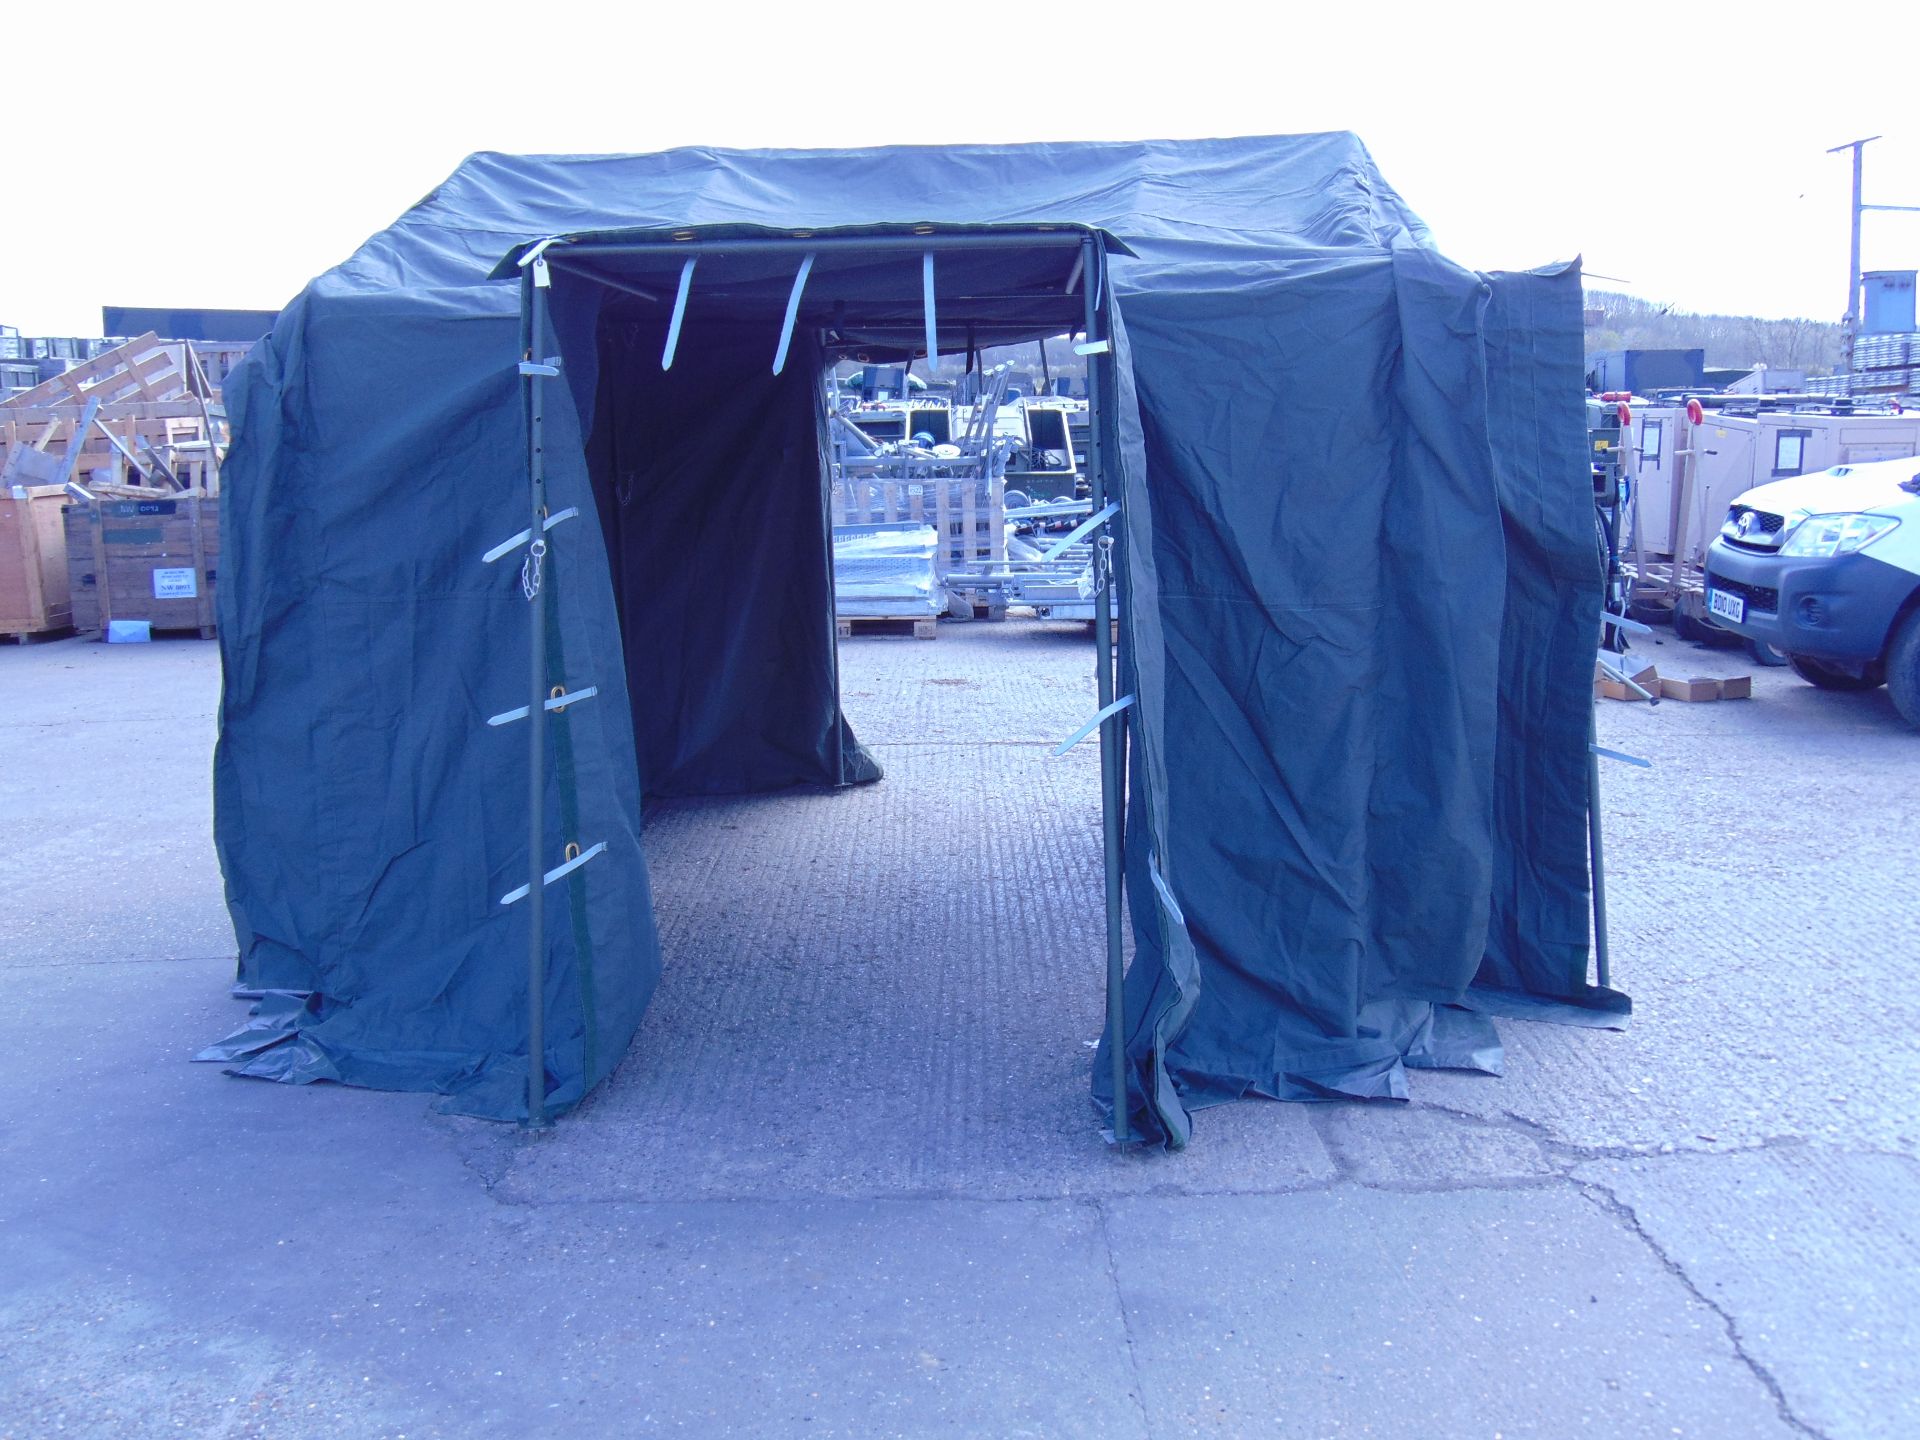 8'x8' Fv432 Closed Command/Sleeping Tent - Image 3 of 8